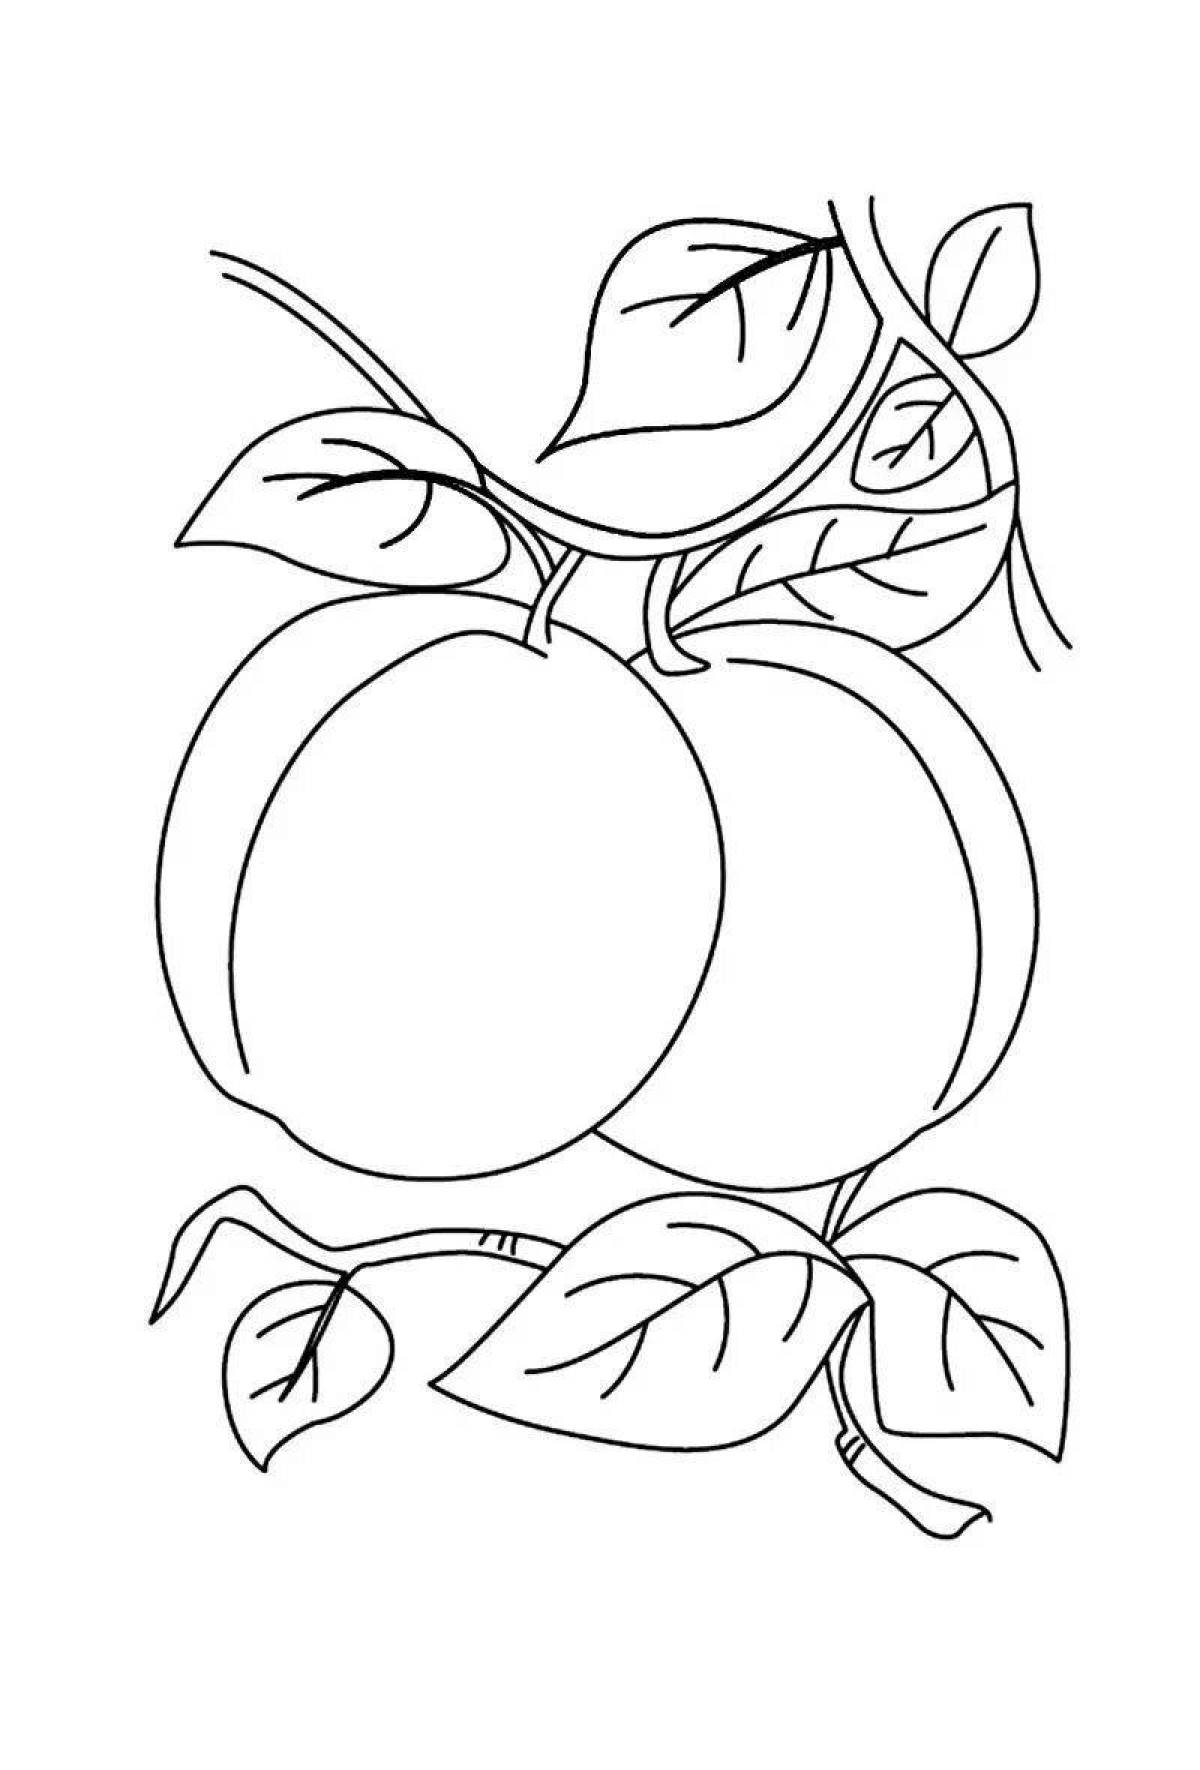 Apricot fun coloring for kids